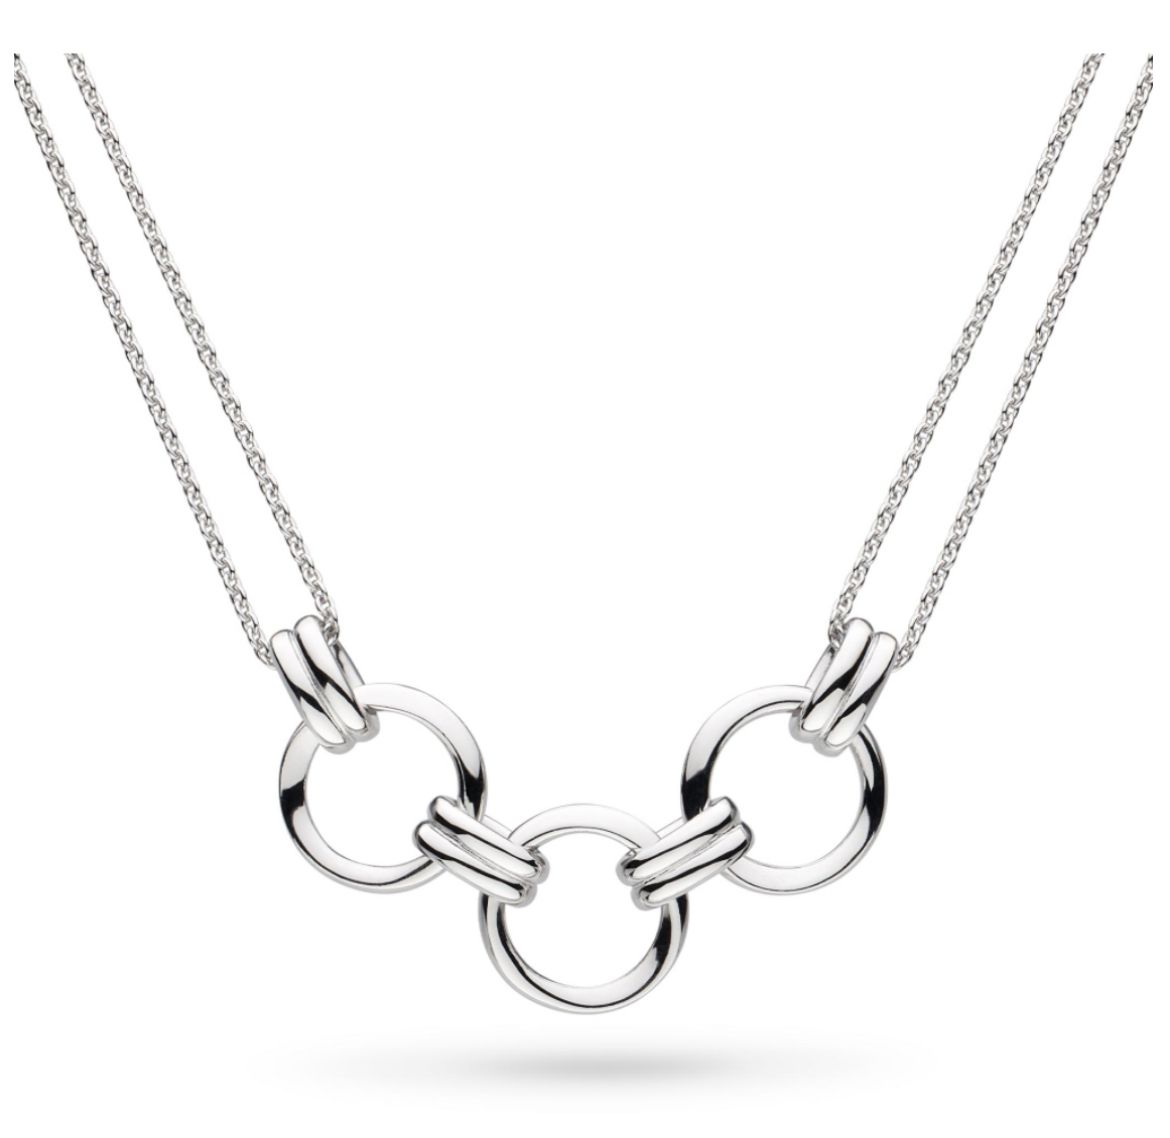 Picture of Bevel Unity Twin Chain Necklace